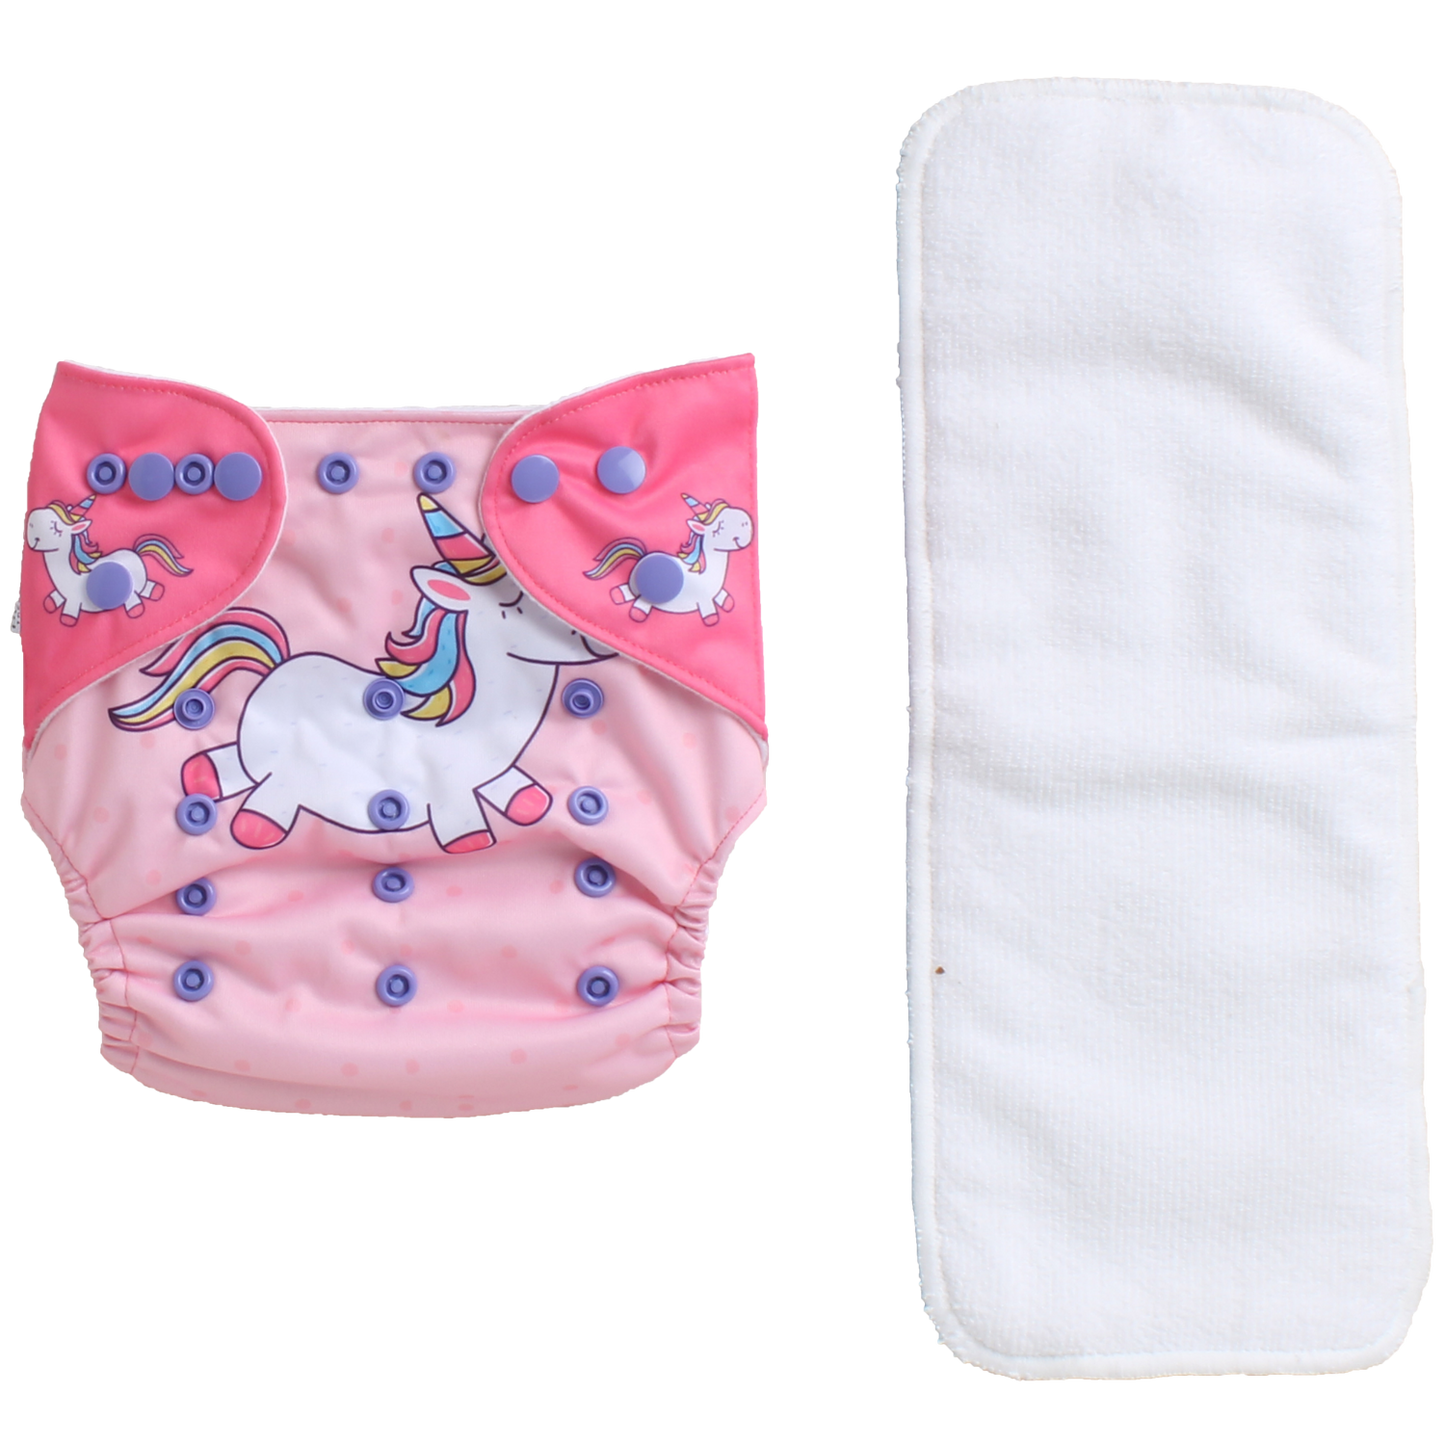 Polka Tots Cloth Diaper with Insert Pink 